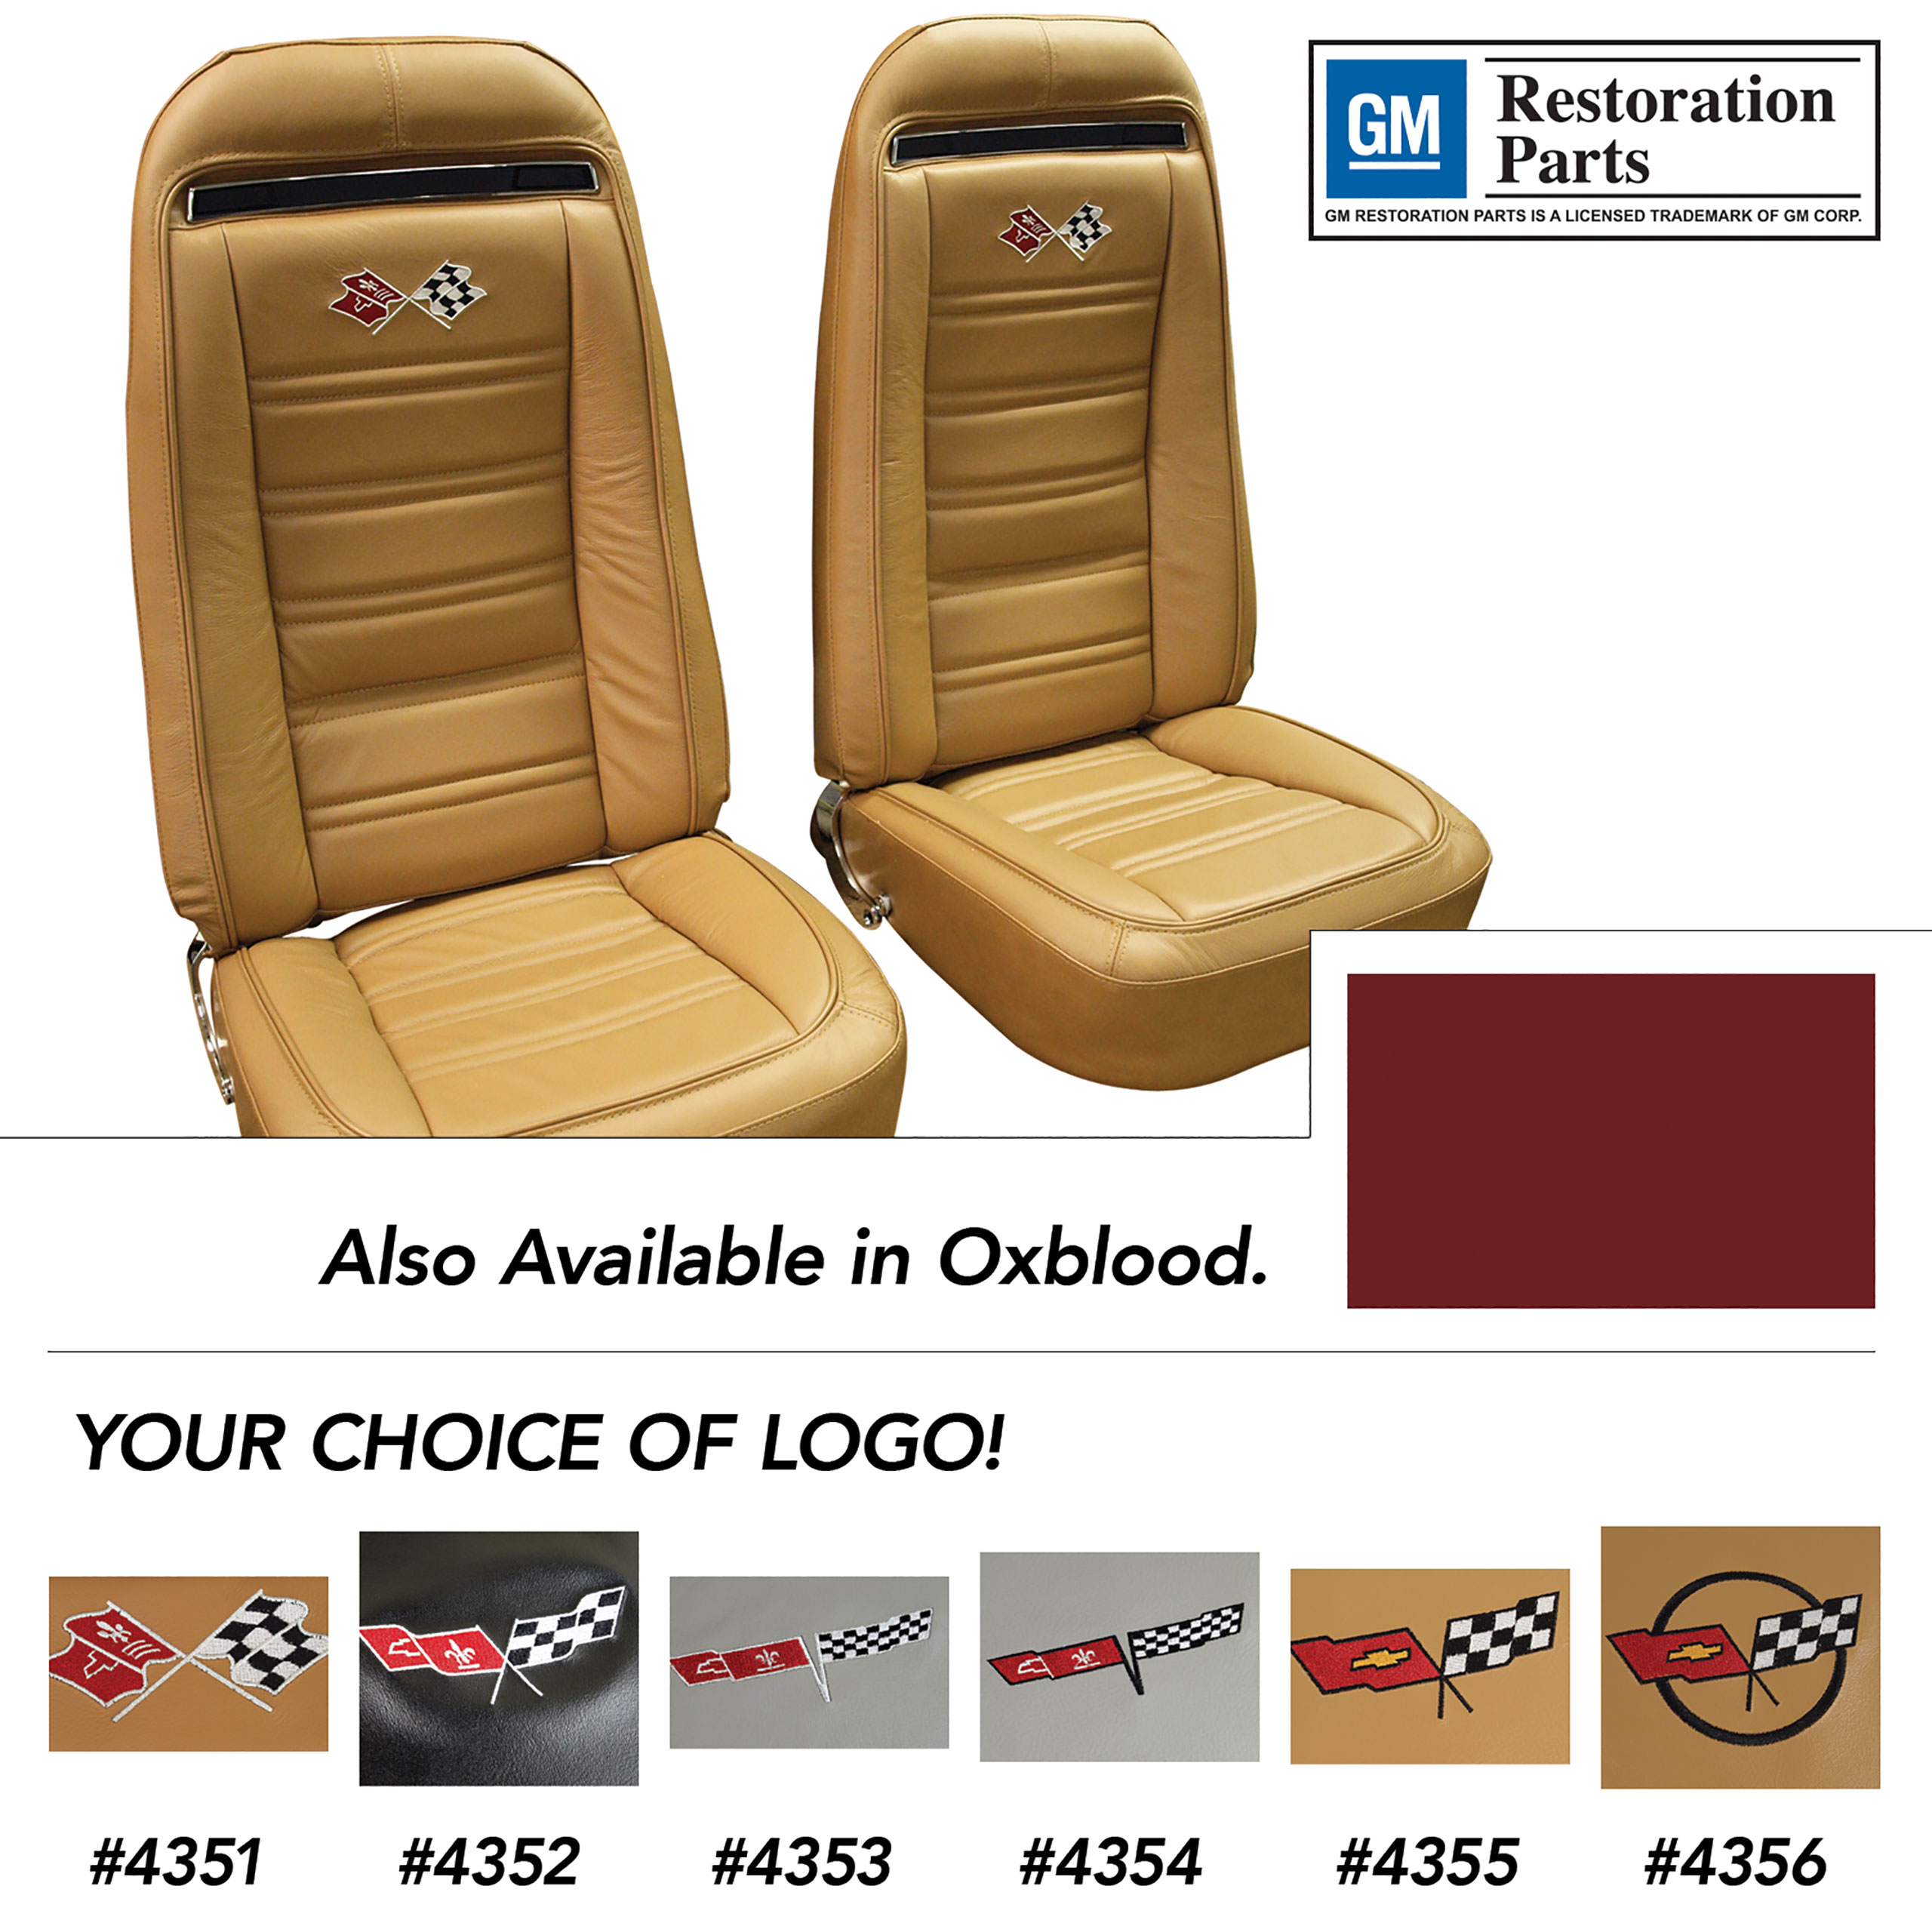 1975 Corvette C3 Embroidered OE Style Seat Covers Oxblood Leather/Vinyl CA-419531E 